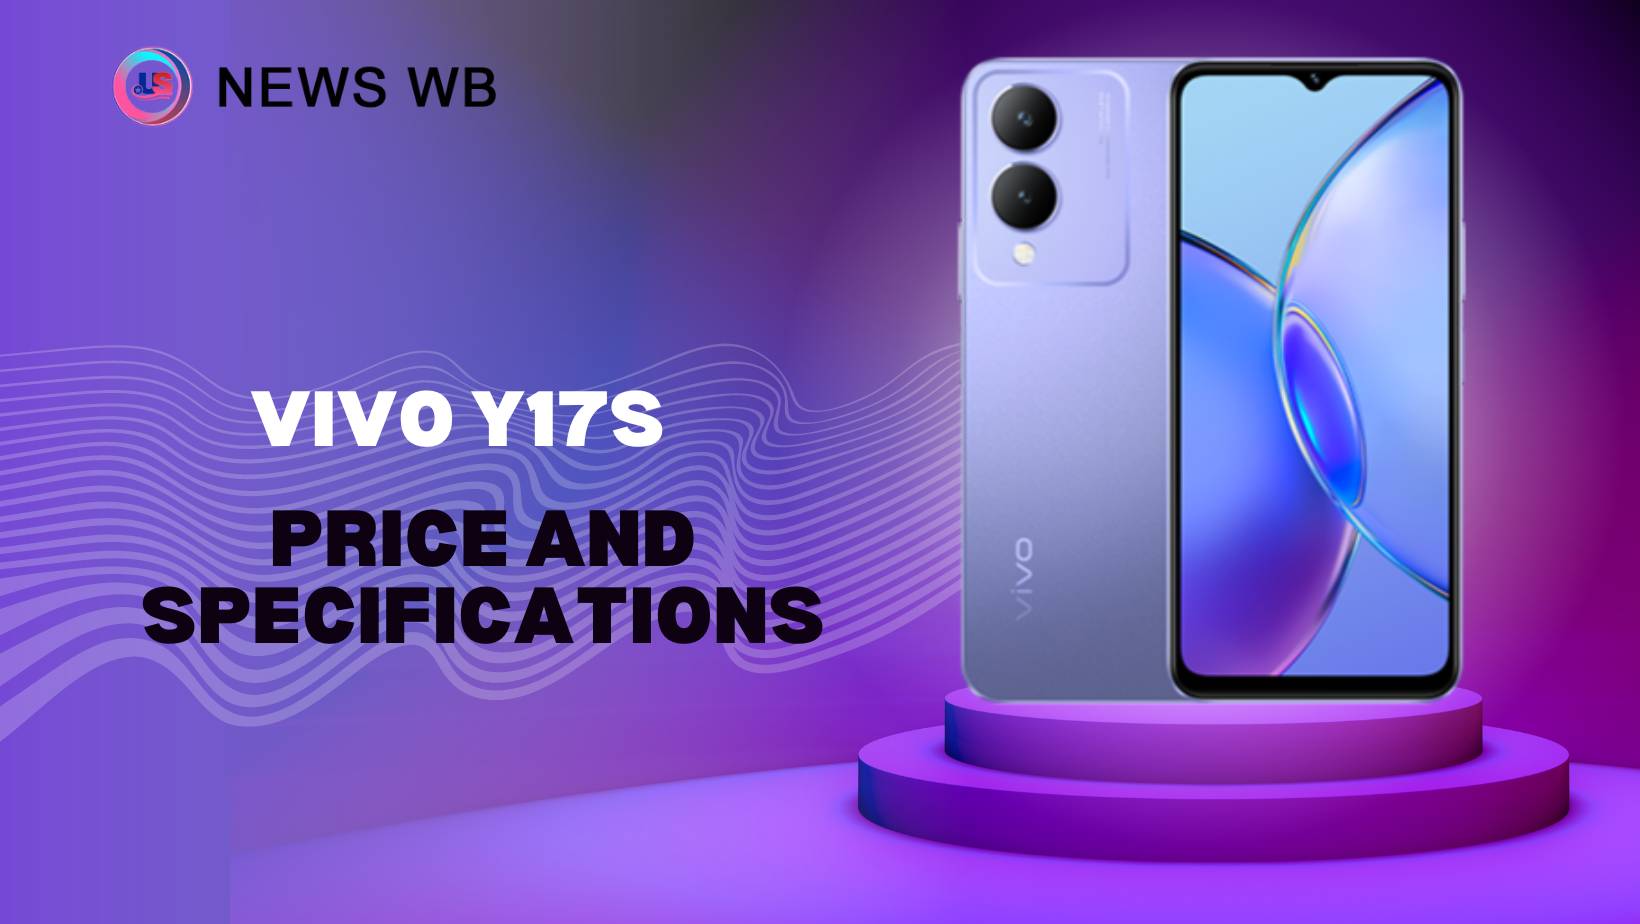 Vivo Y17s Price and Specifications